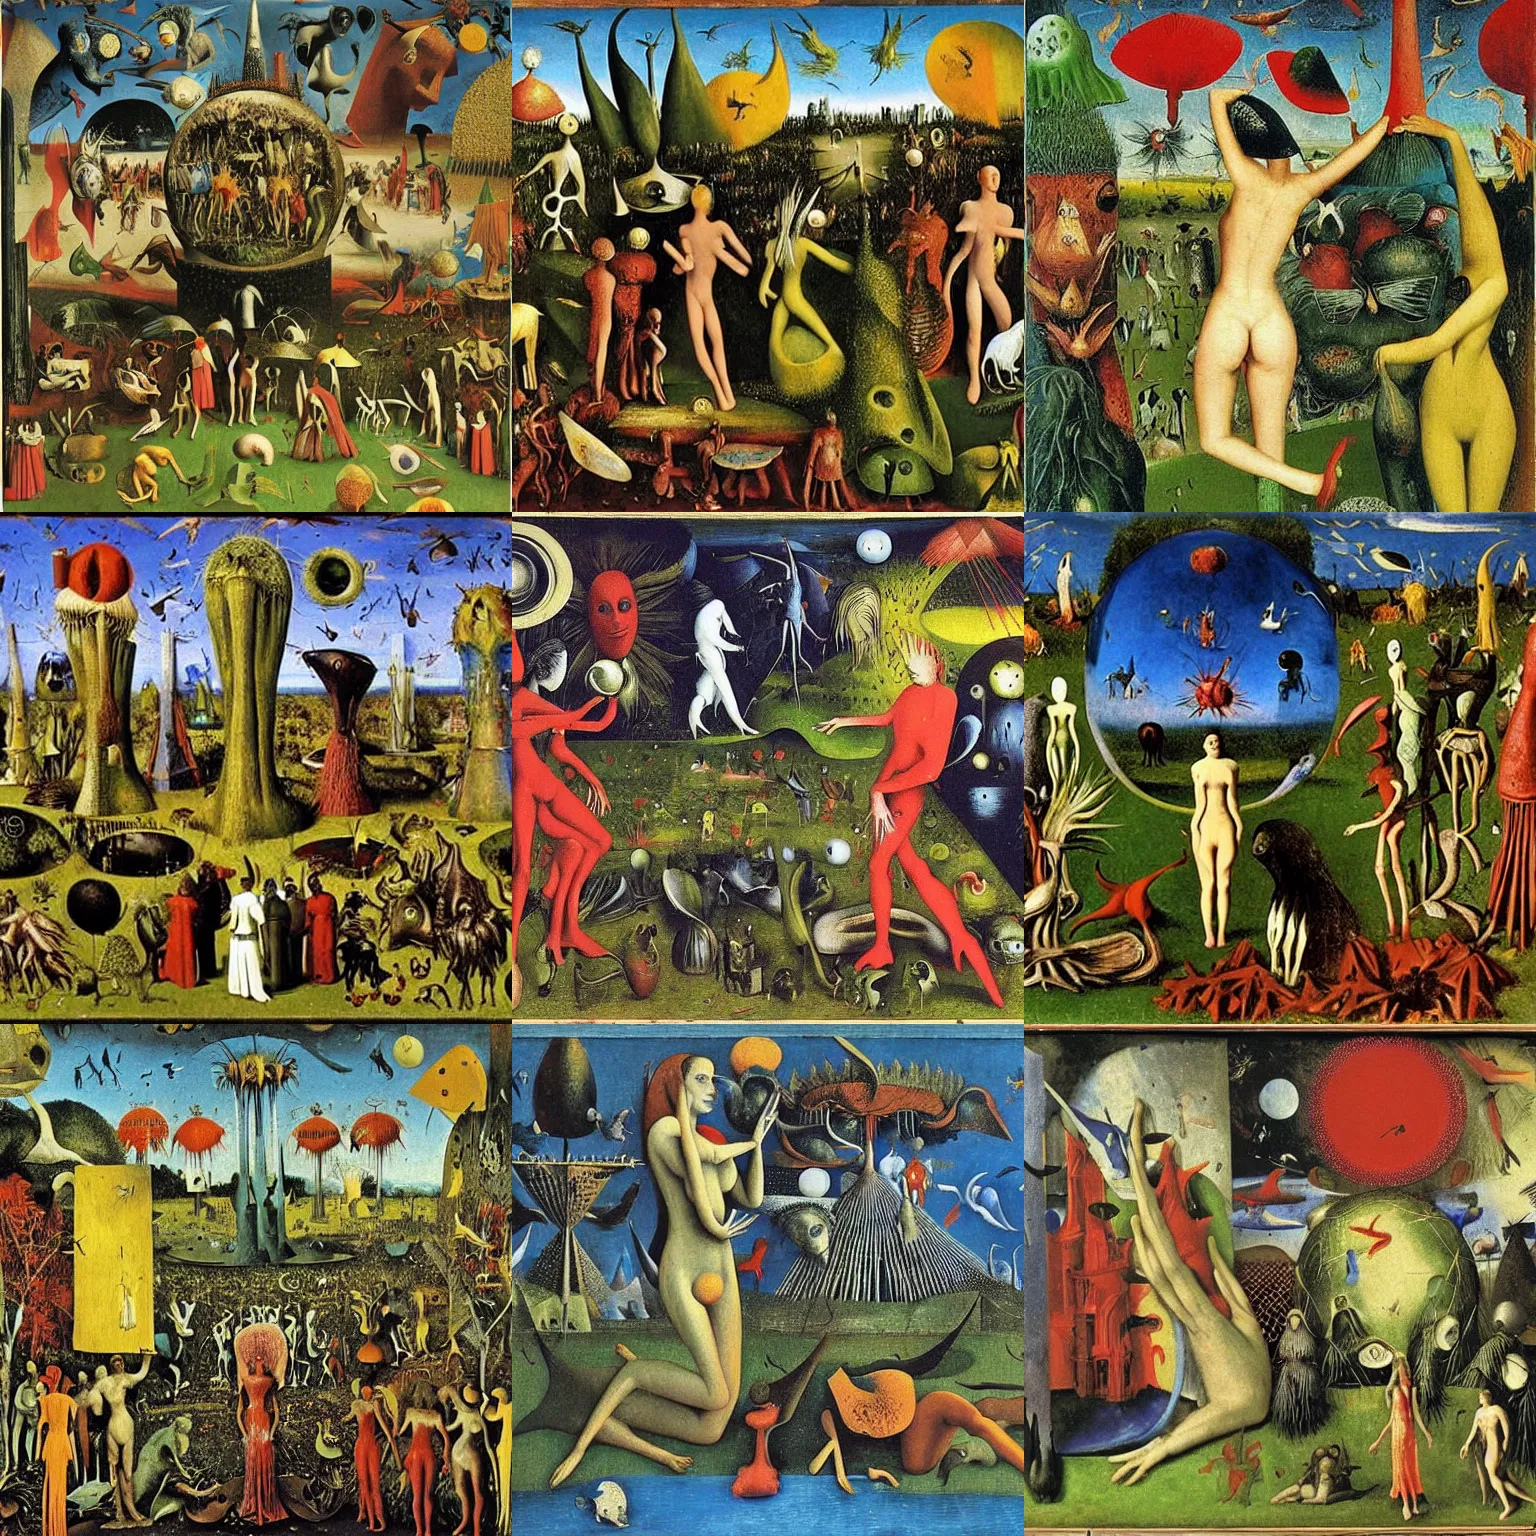 Prompt: The Garden of Earthly Delights by Max Ernst